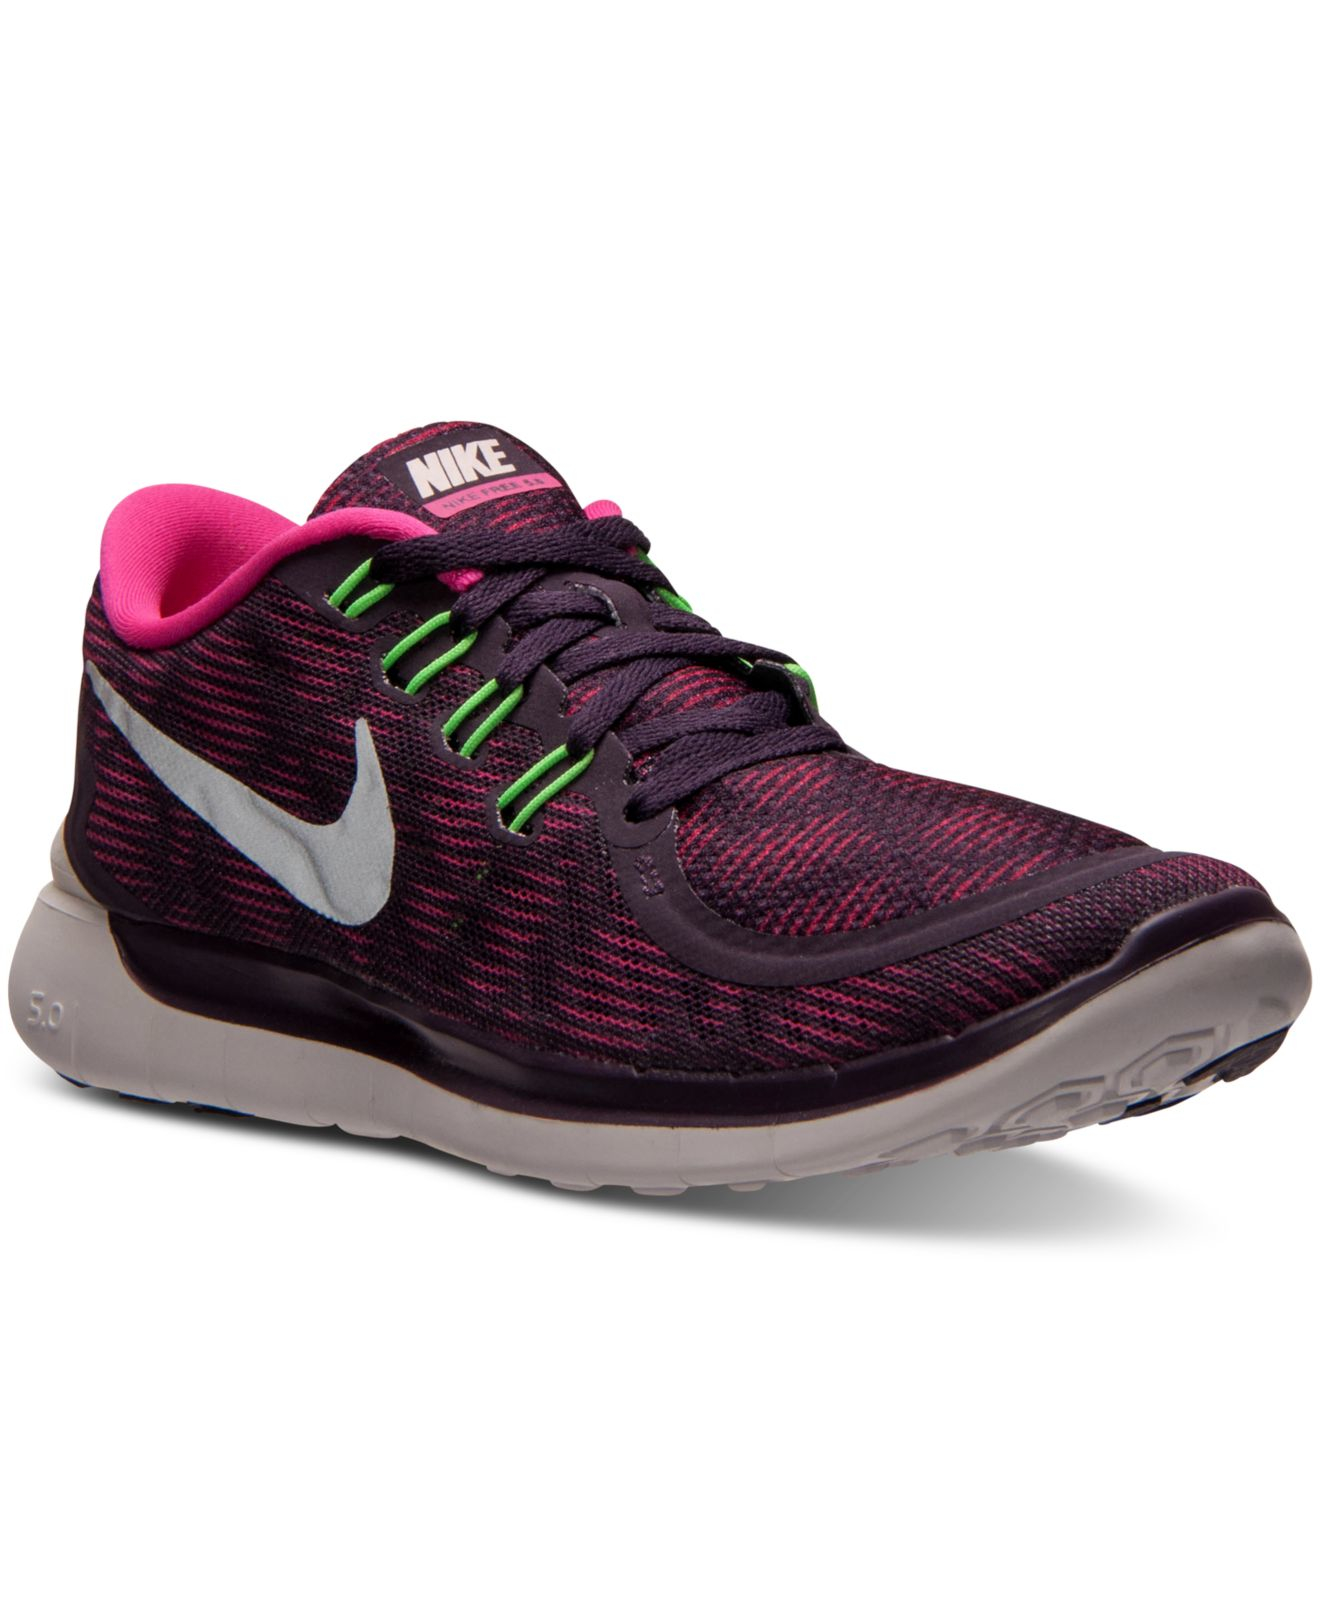 Lyst - Nike Women's Free 5.0 Print Running Sneakers From Finish Line in ...